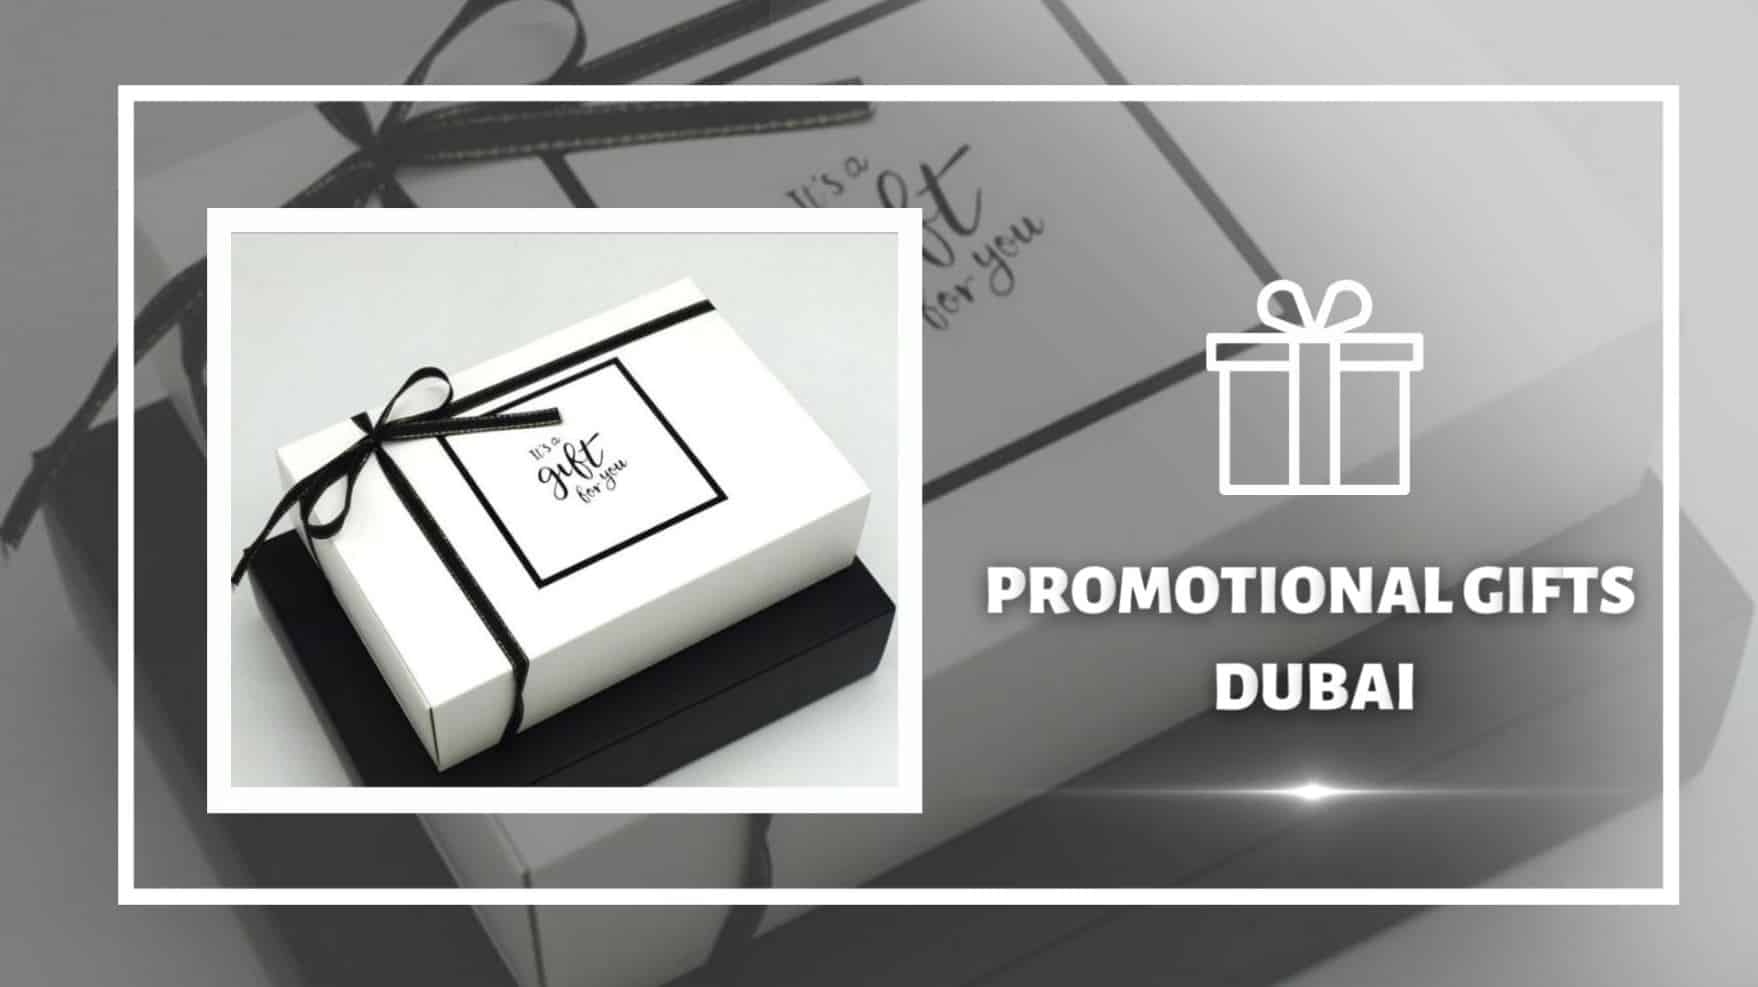 ColourWaves - Corporate Gifts Suppliers & printing company in Dubai UAE -  Colour Waves Promotional Gifts Suppliers and Corporate Gift items in Dubai  UAE. We offer all types of Premium Gifts, Promotional Giveaways